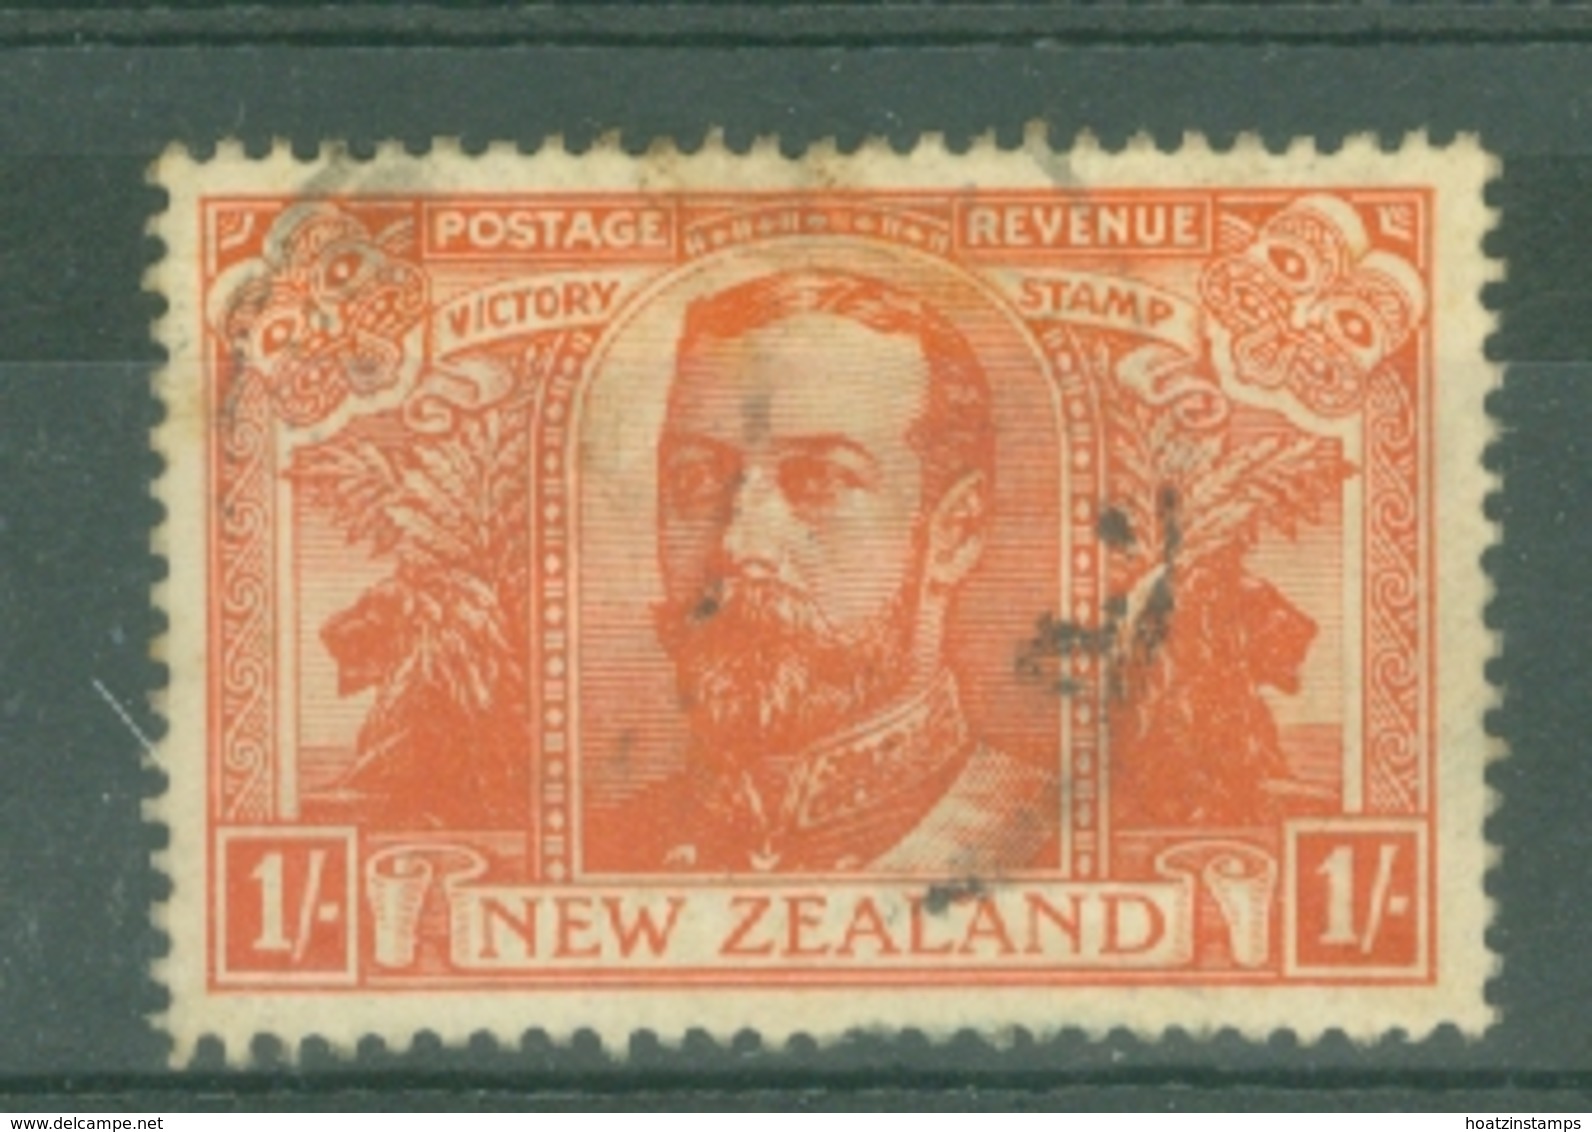 New Zealand: 1920   Victory     SG458     1/-    Used - Gebraucht